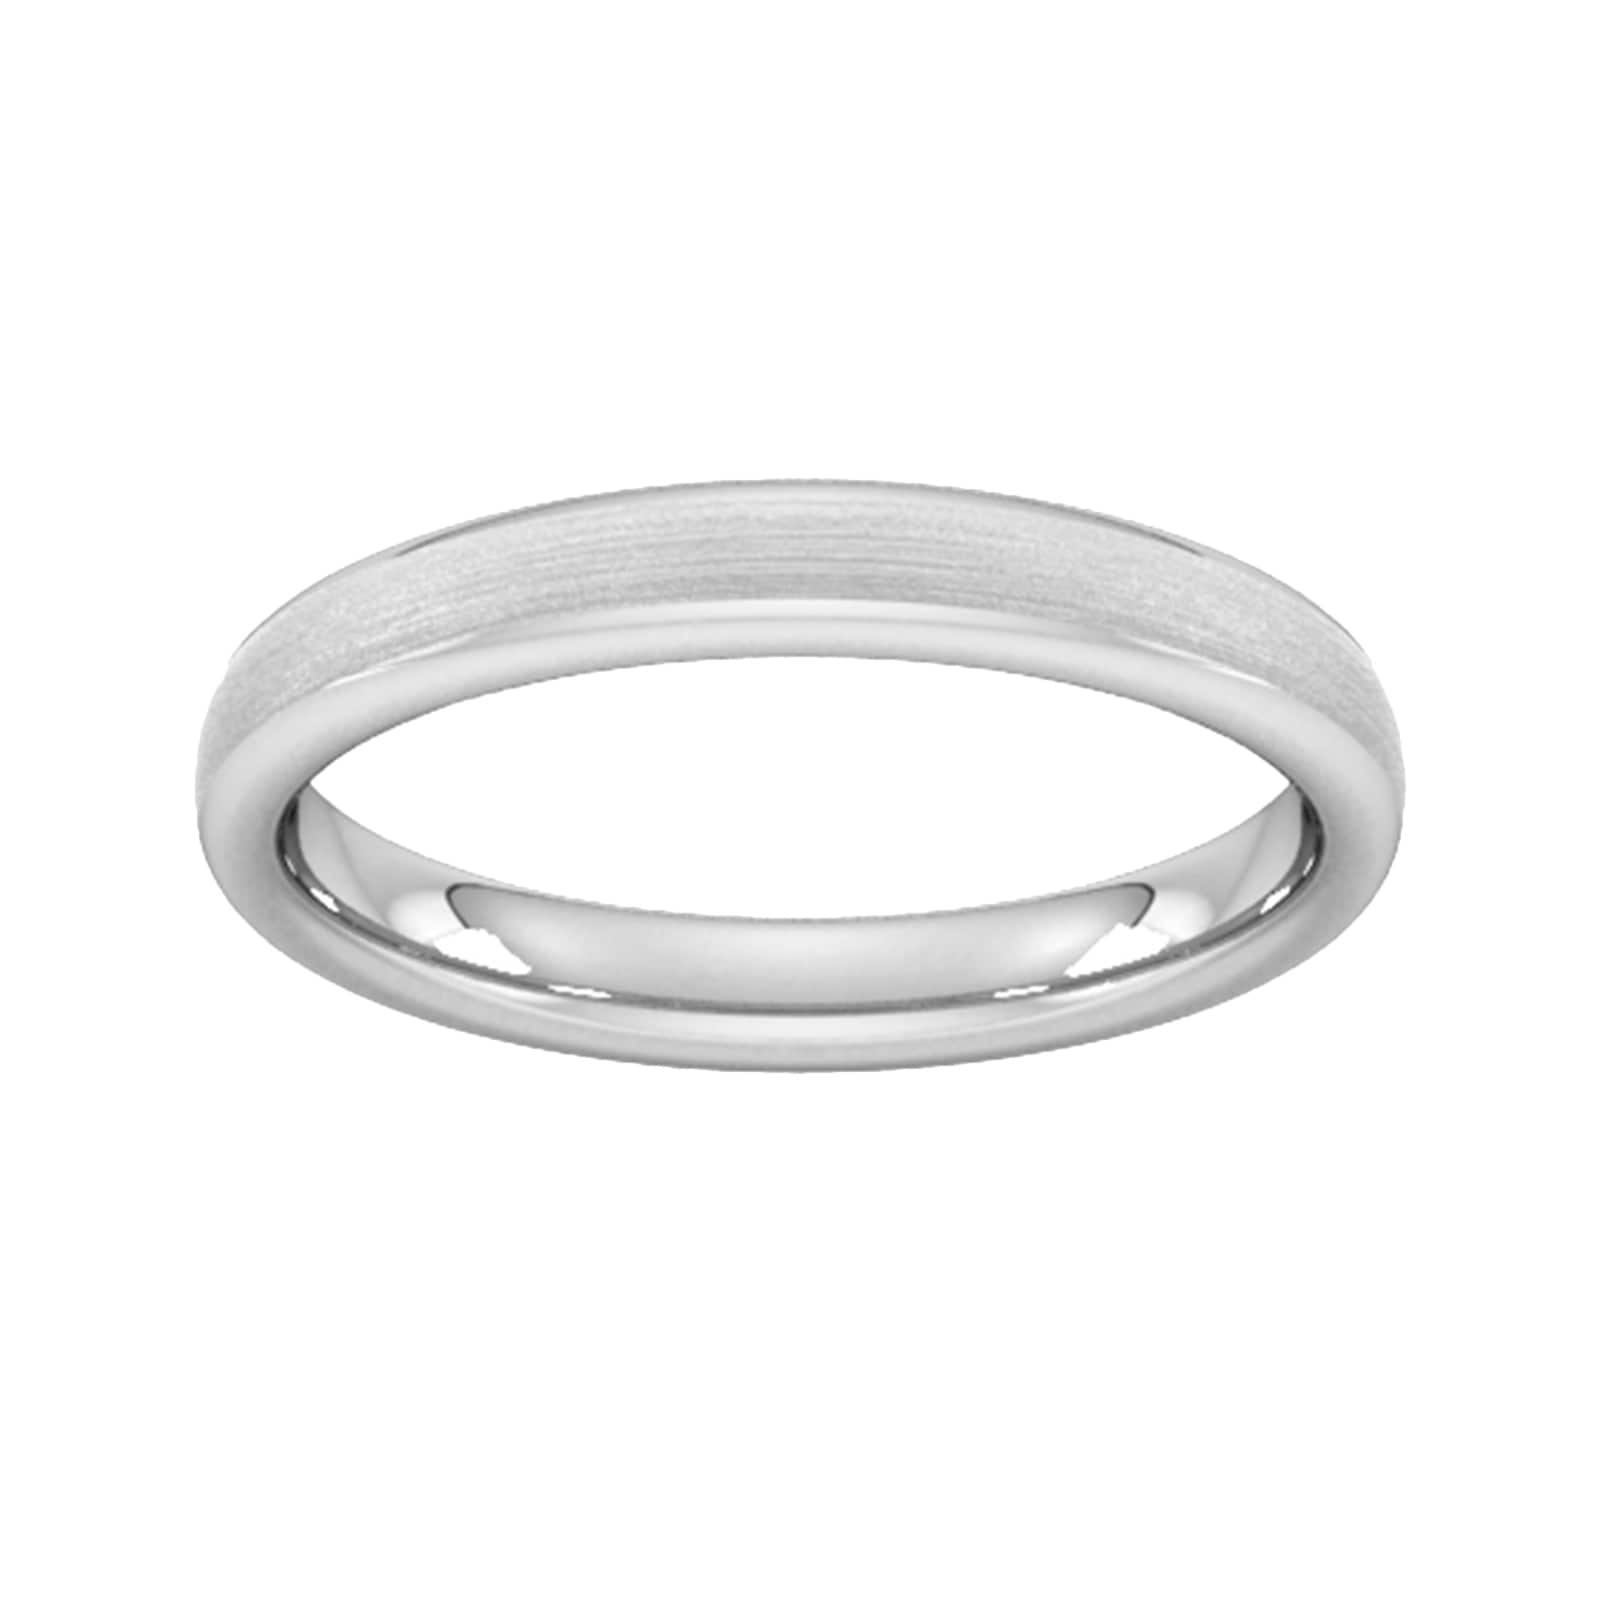 3mm Flat Court Heavy Matt Finished Wedding Ring In 18 Carat White Gold - Ring Size M